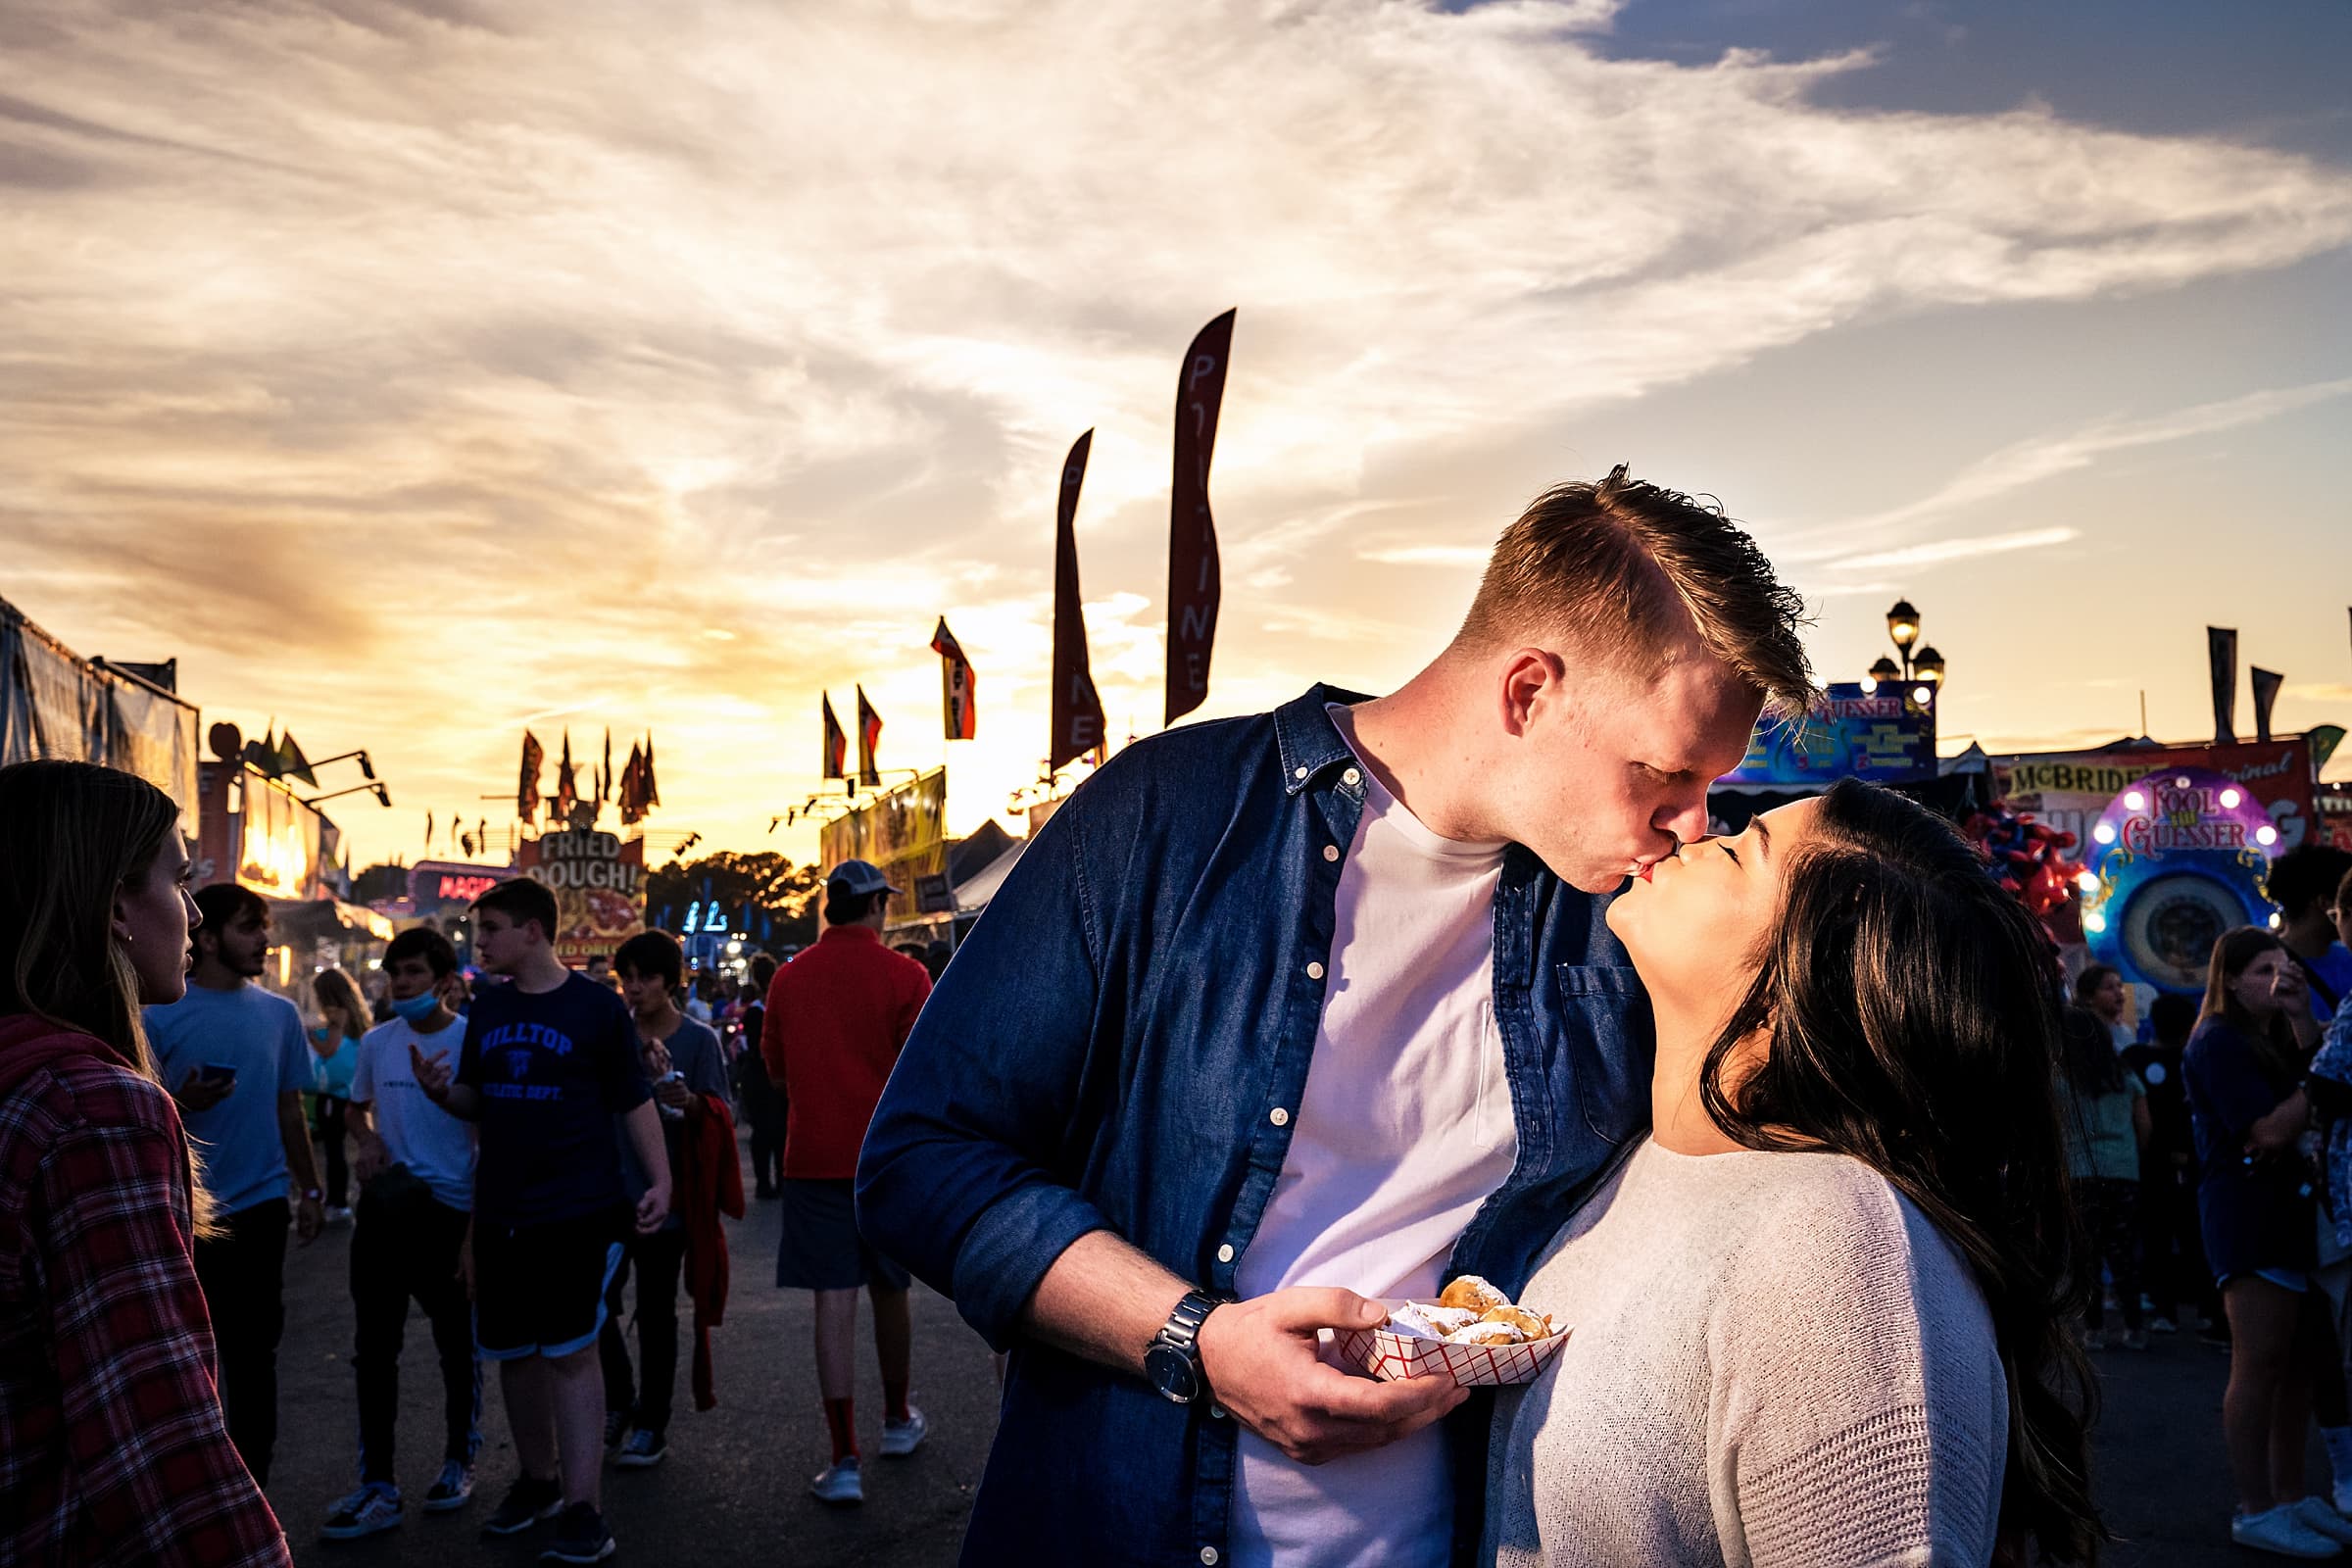 NC State Fair Engagement photos are some of the most fun